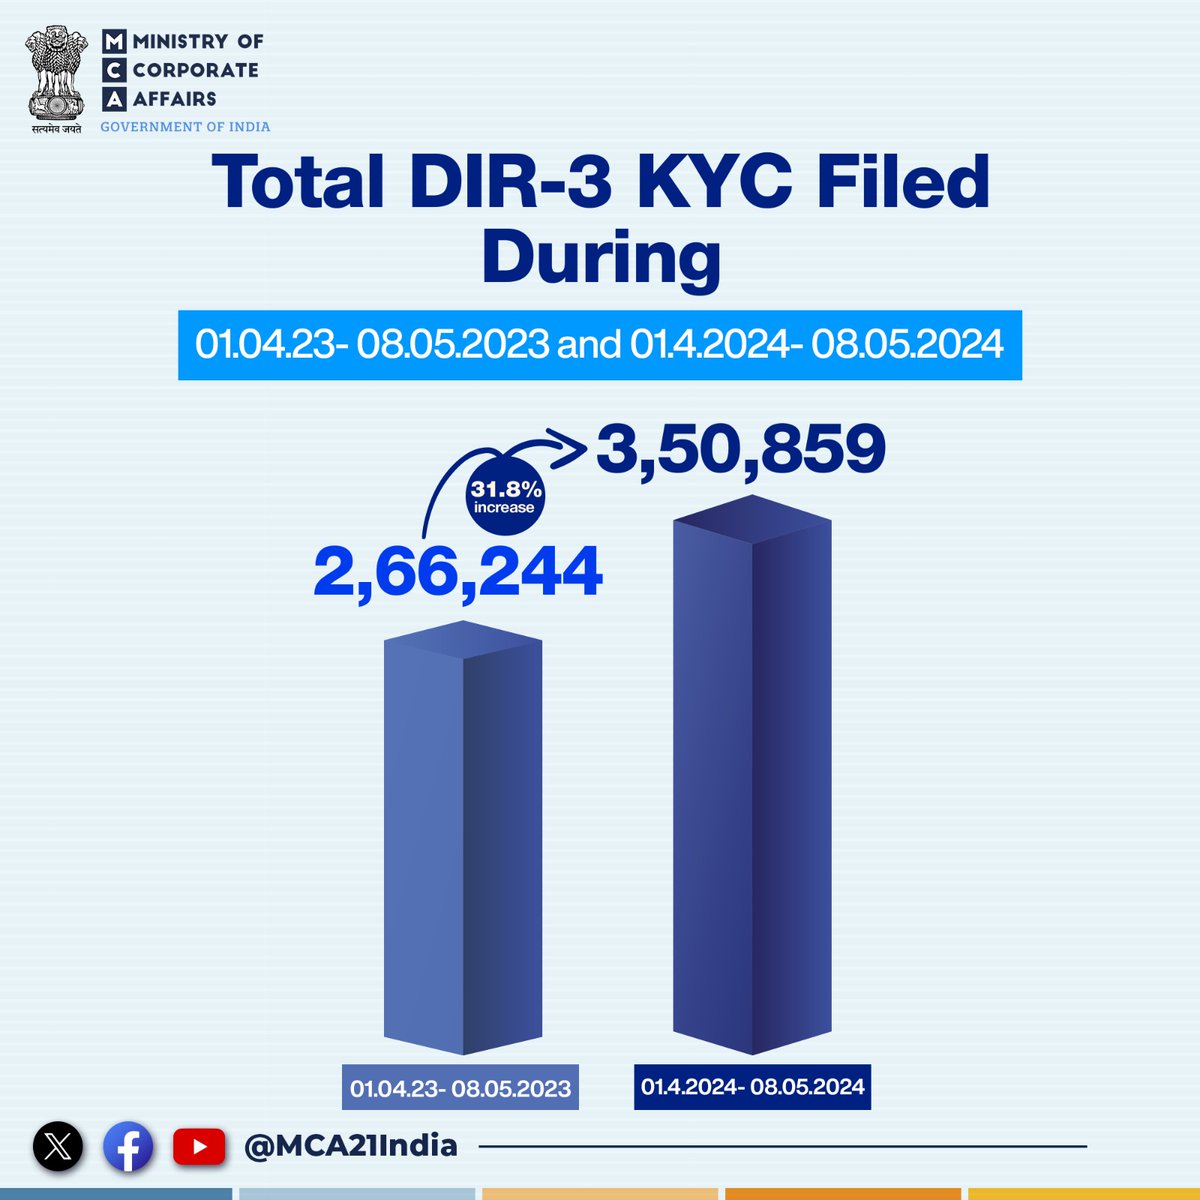 During 01.4.2024- 08.05.2024, 350,859 DIR-3 KYC Forms were filed, compared to the 266,244 DIR-3 KYC Forms filed during 01.04.23- 08.05.2023.

#MCA #MCA21 #EaseOfDoingBusiness #DIR3KYC #Forms #Filing